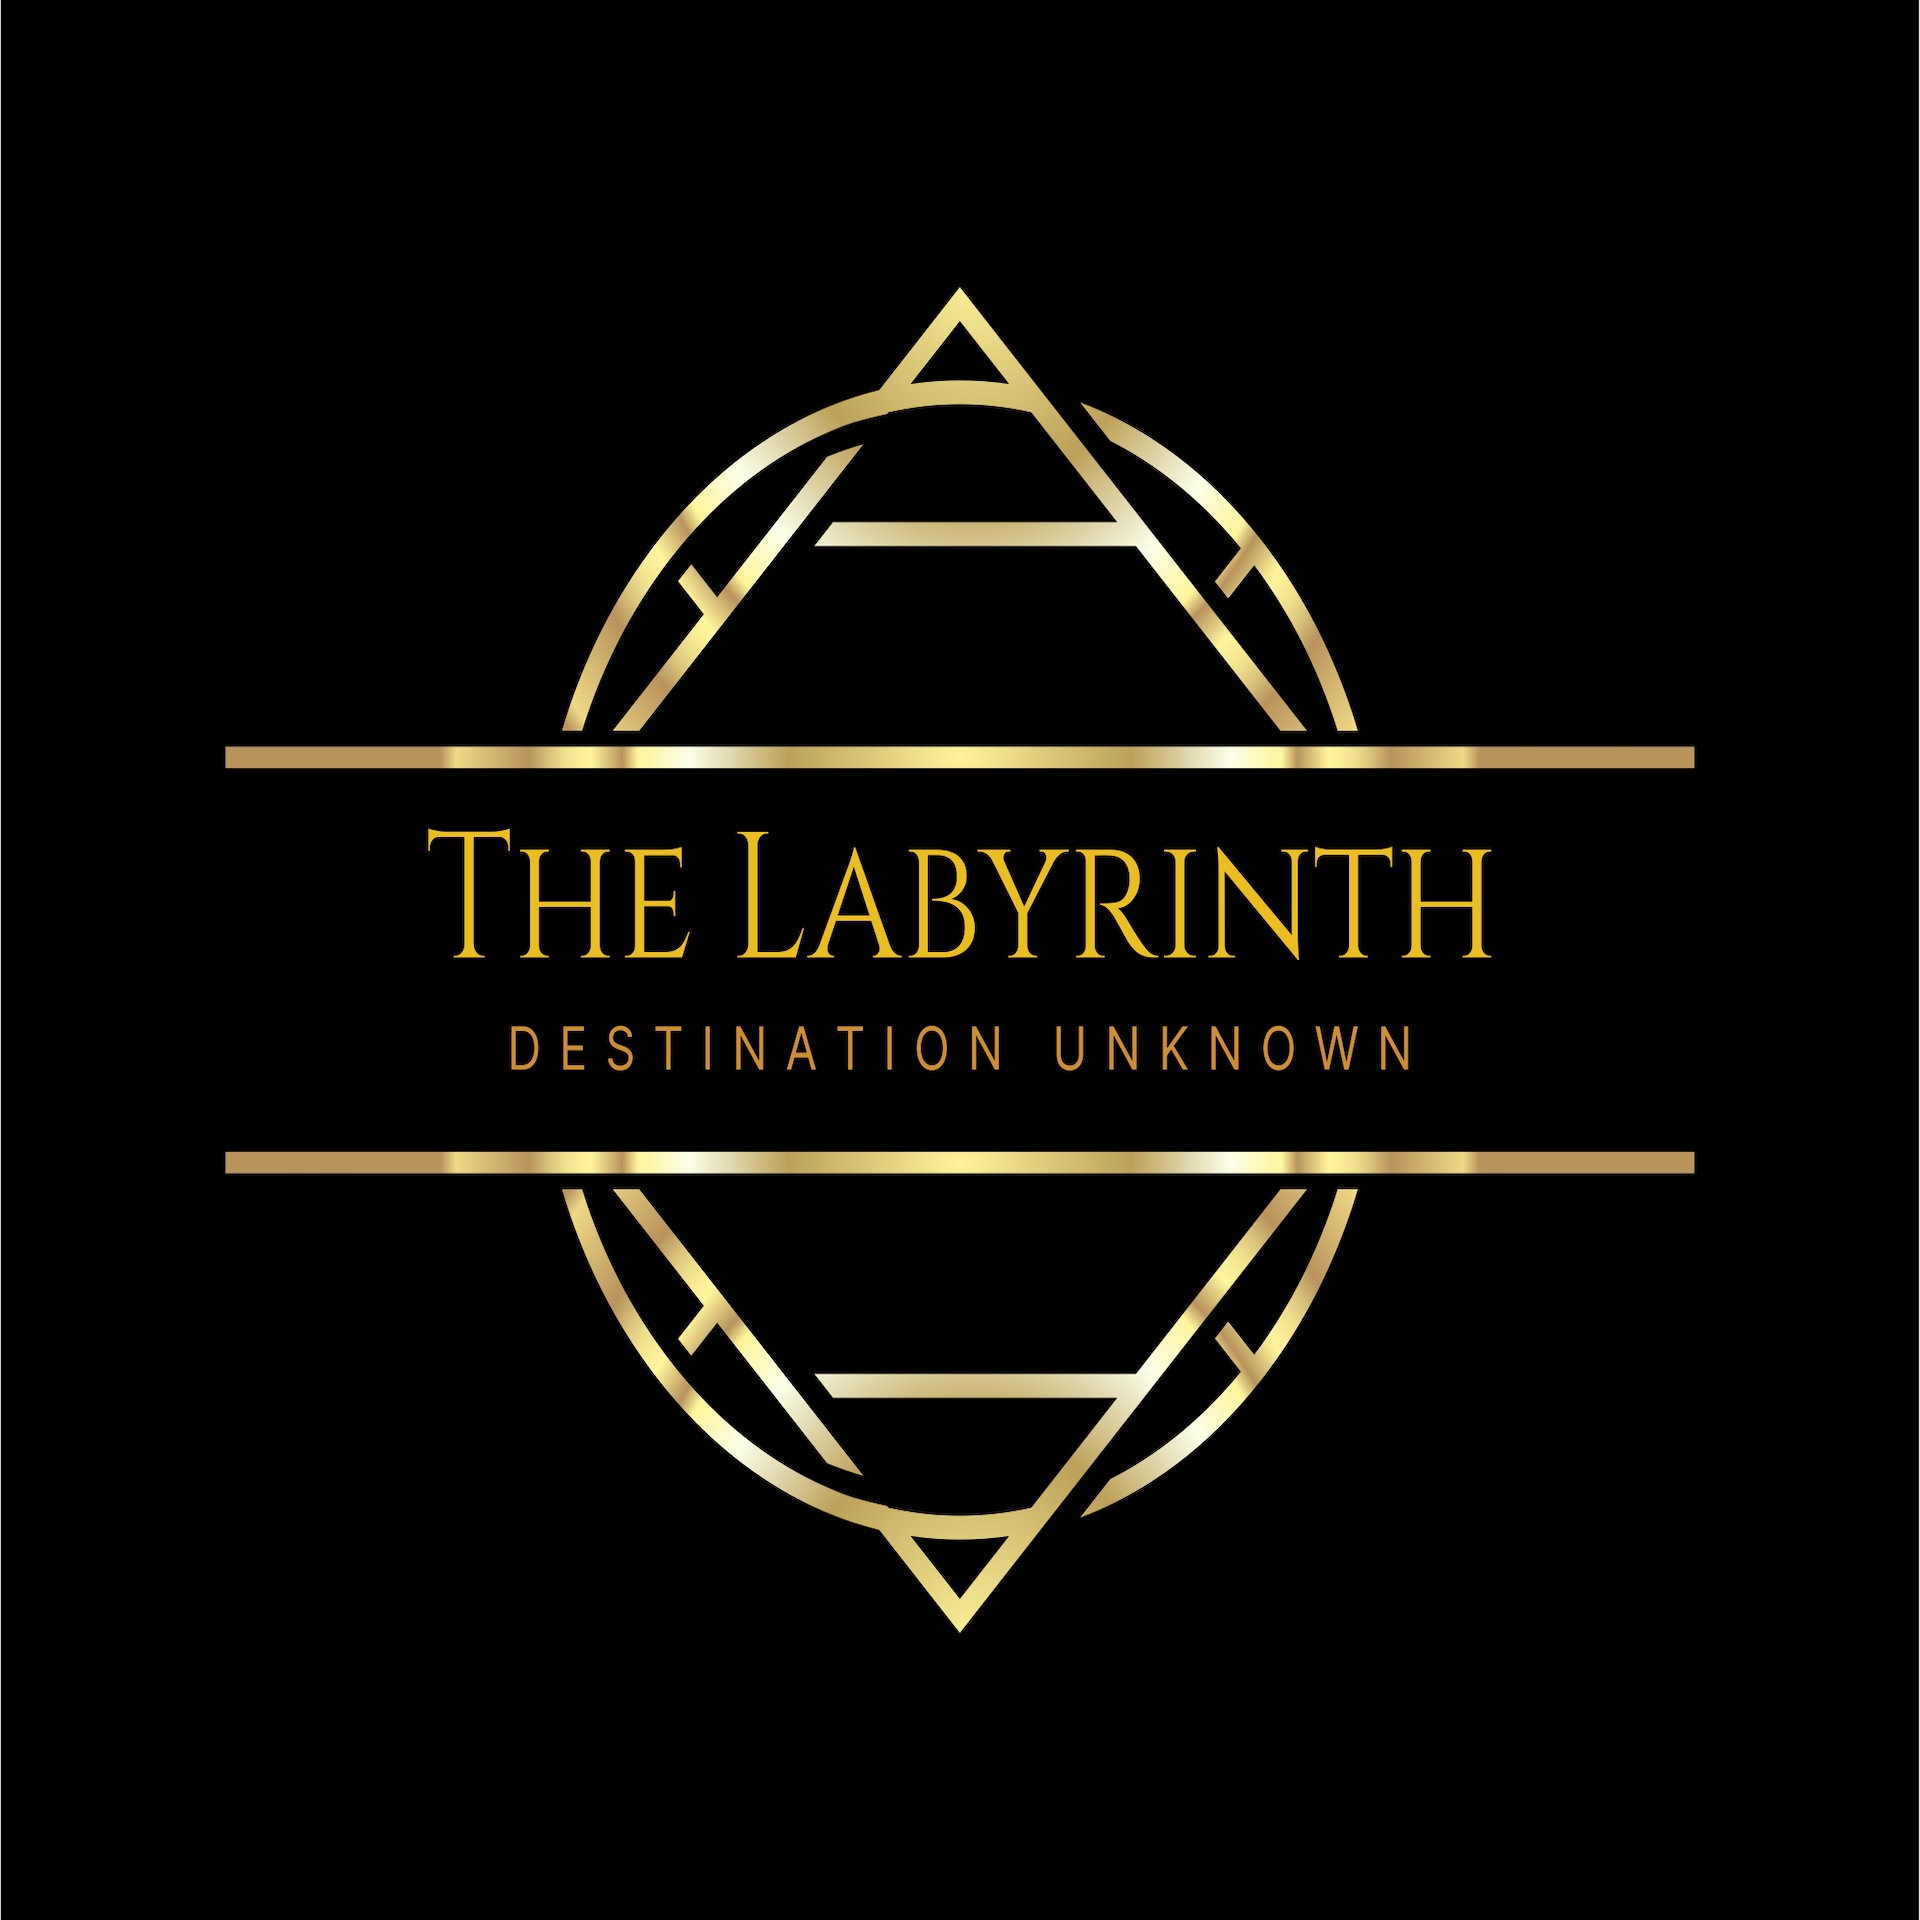 Lisa Carley's Podcast, The Labyrinth's 'Be Your Note' An Exploration of Surrender, Intuition, and Purpose: A Conversation with Henry Cretella, M.D.